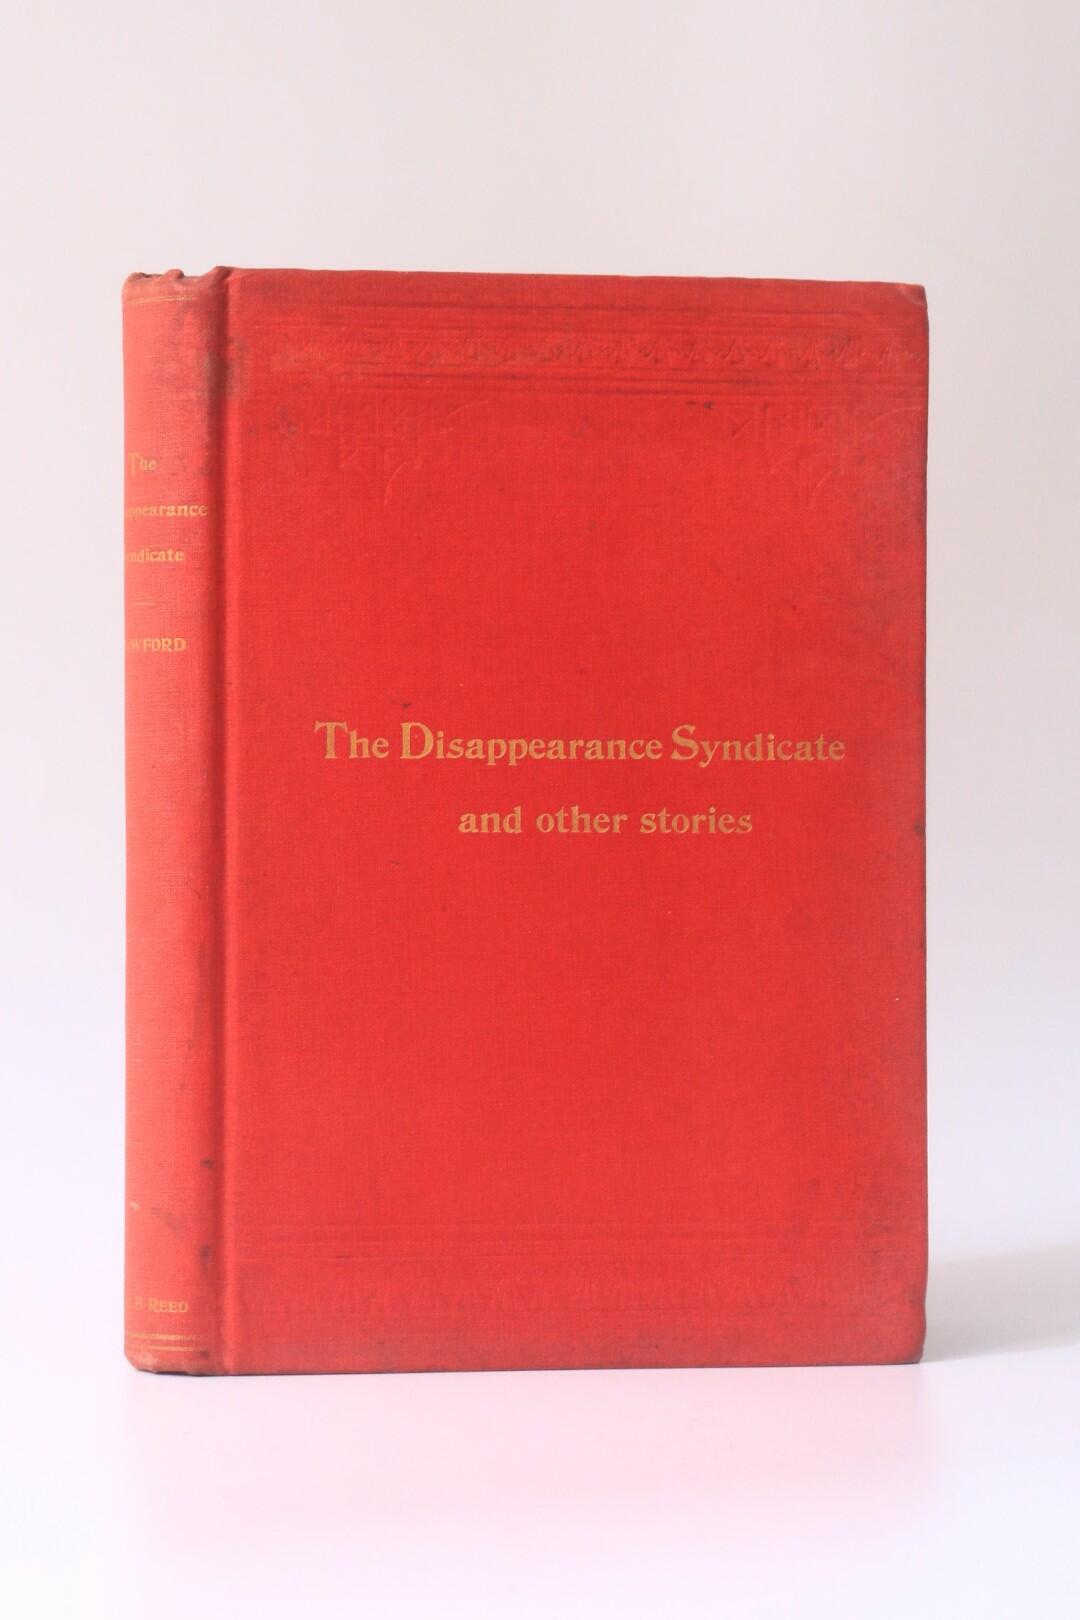 T.C. Crawford - The Disappearance Syndicate and Other Stories - Charles B. Reed, 1894, First Edition.